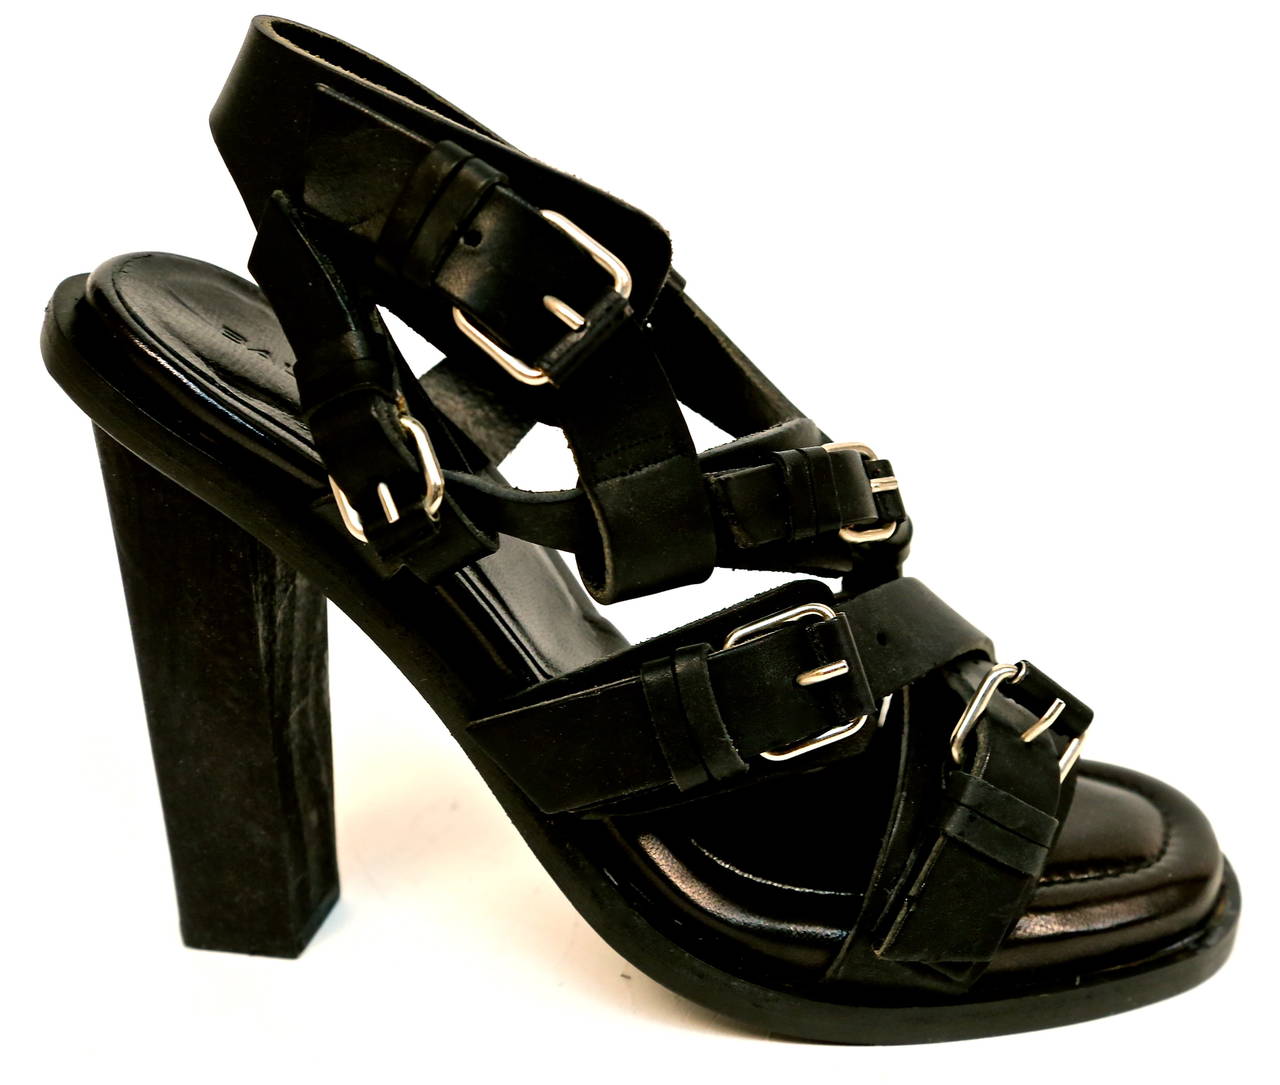 THE sandal featured on every model for spring 2003 Balenciaga show. Very jet black leather sandals with silver buckles and just over 4.75